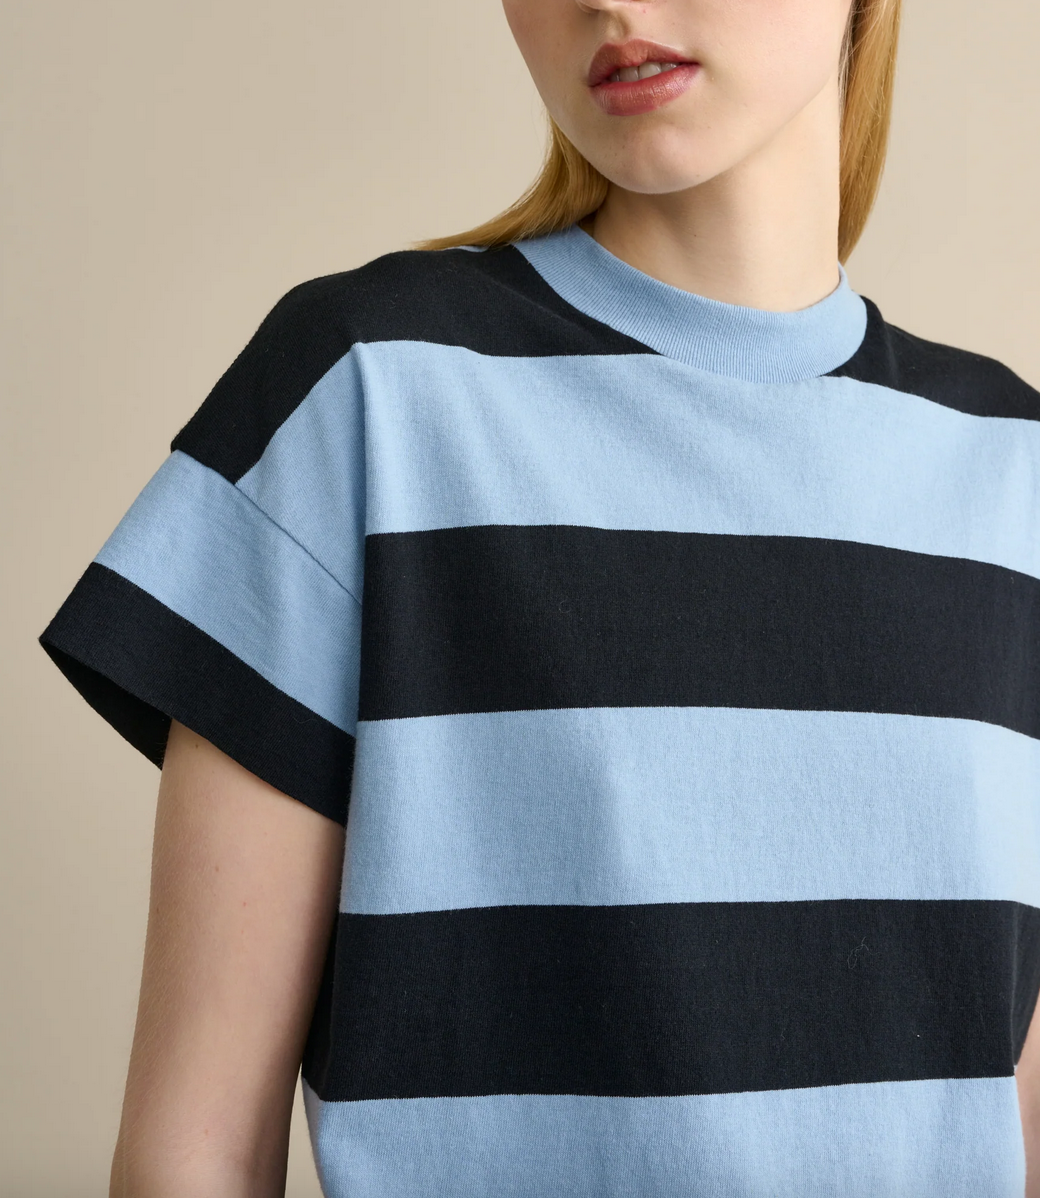 Vogue wide stripe tee black and pale blue